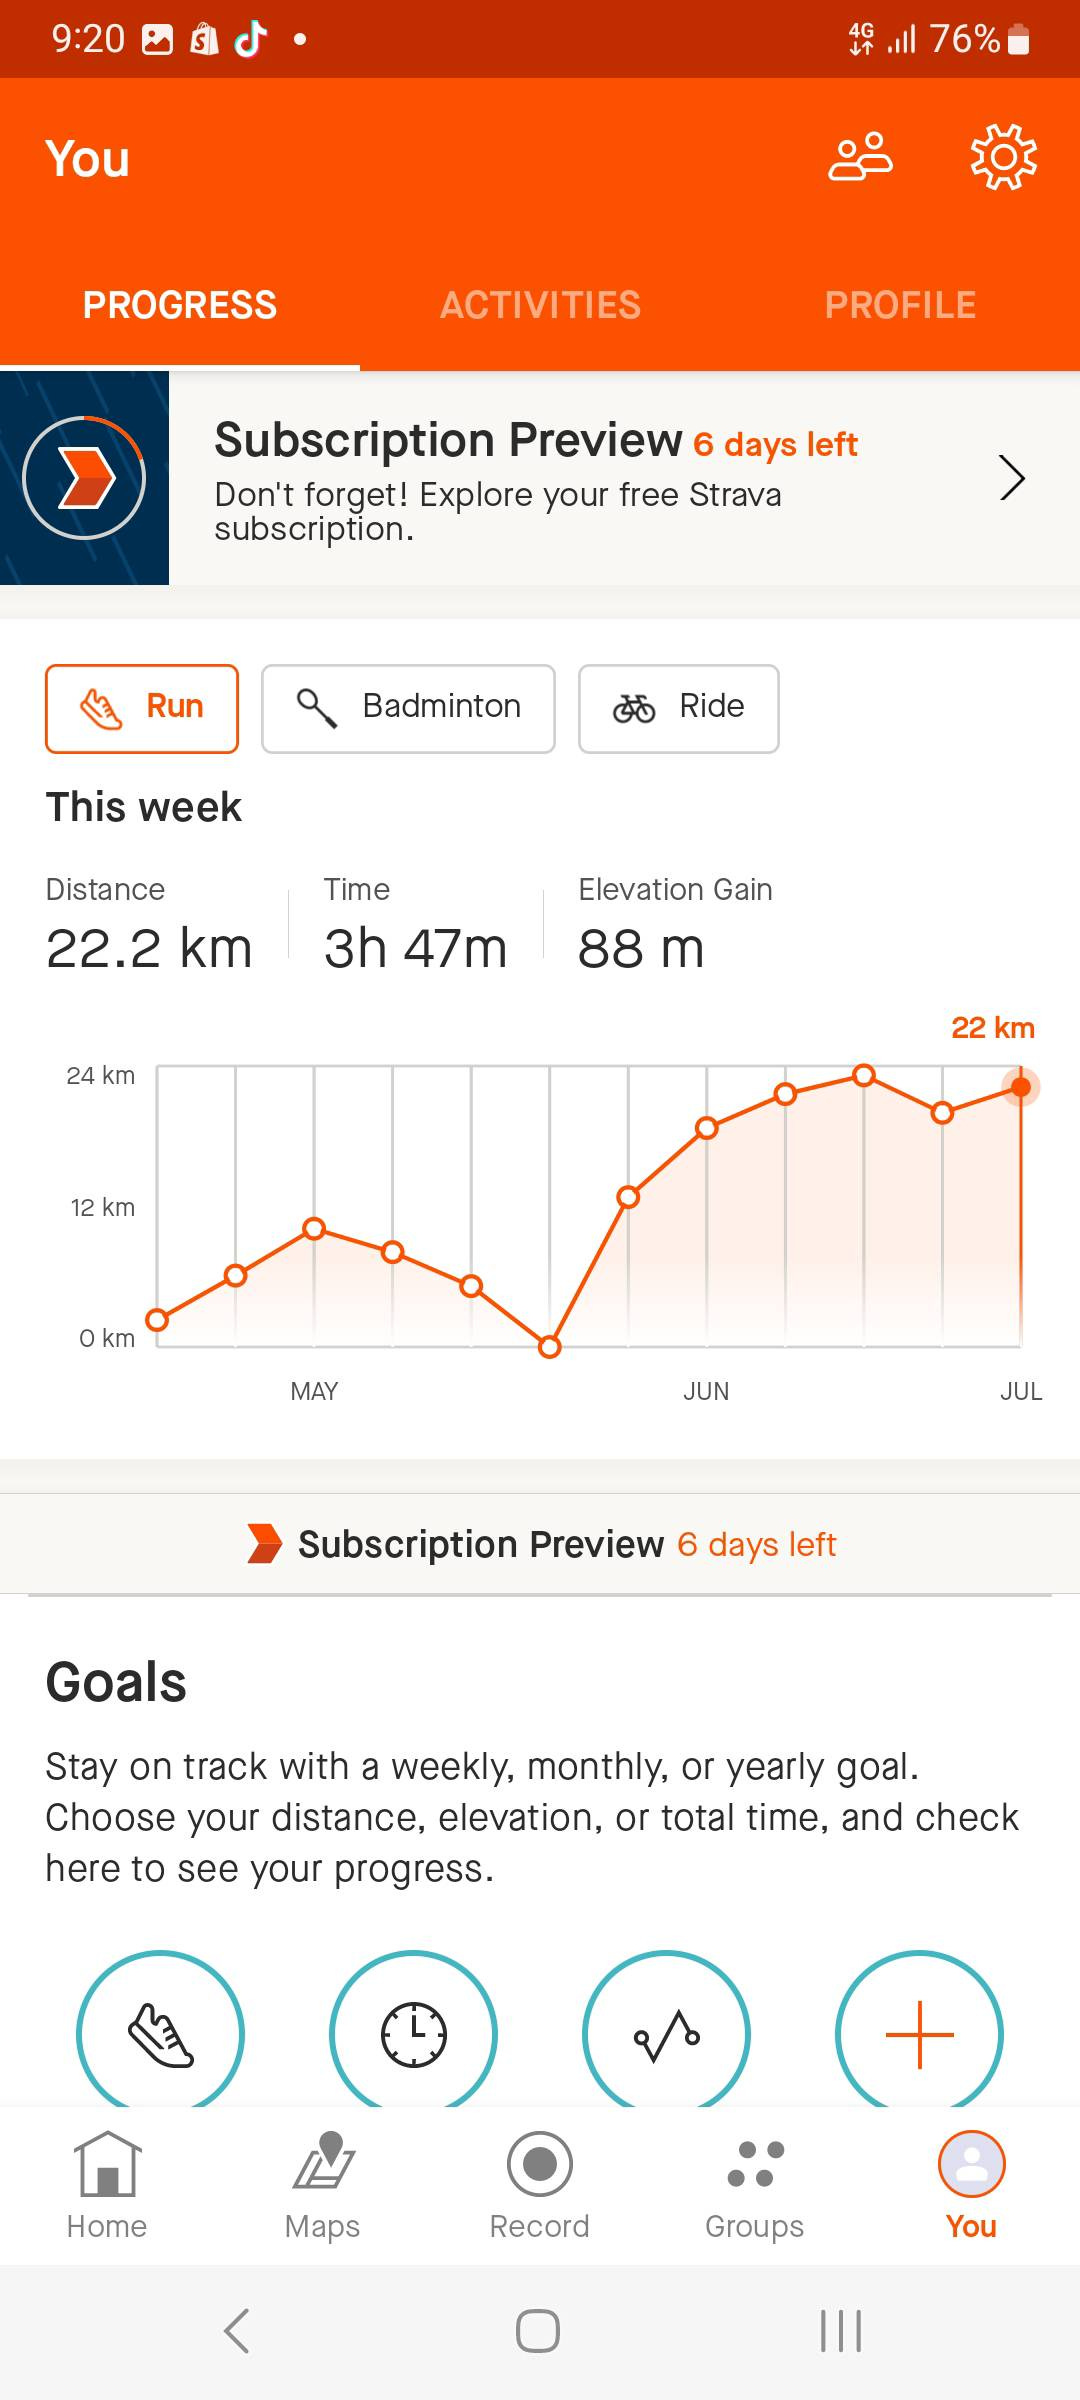 May be an image of text that says "9:20 You 76% PROGRESS ACTIVITIES PROFILE Subscription Preview days left Don't forget! Explore your free Strava subscription. Run Badminton đ Ride This week Distance 22.2 km Time 3h 47m Elevation Gain 88 m 4km 12km 0km MAY JUN JUL Subscription Preview days left Goals Stay on track with weekly, monthly, yearly goal. Choose your distance, elevation, or total time, and check here to see your progress. �。 Home Maps Record Groups You"